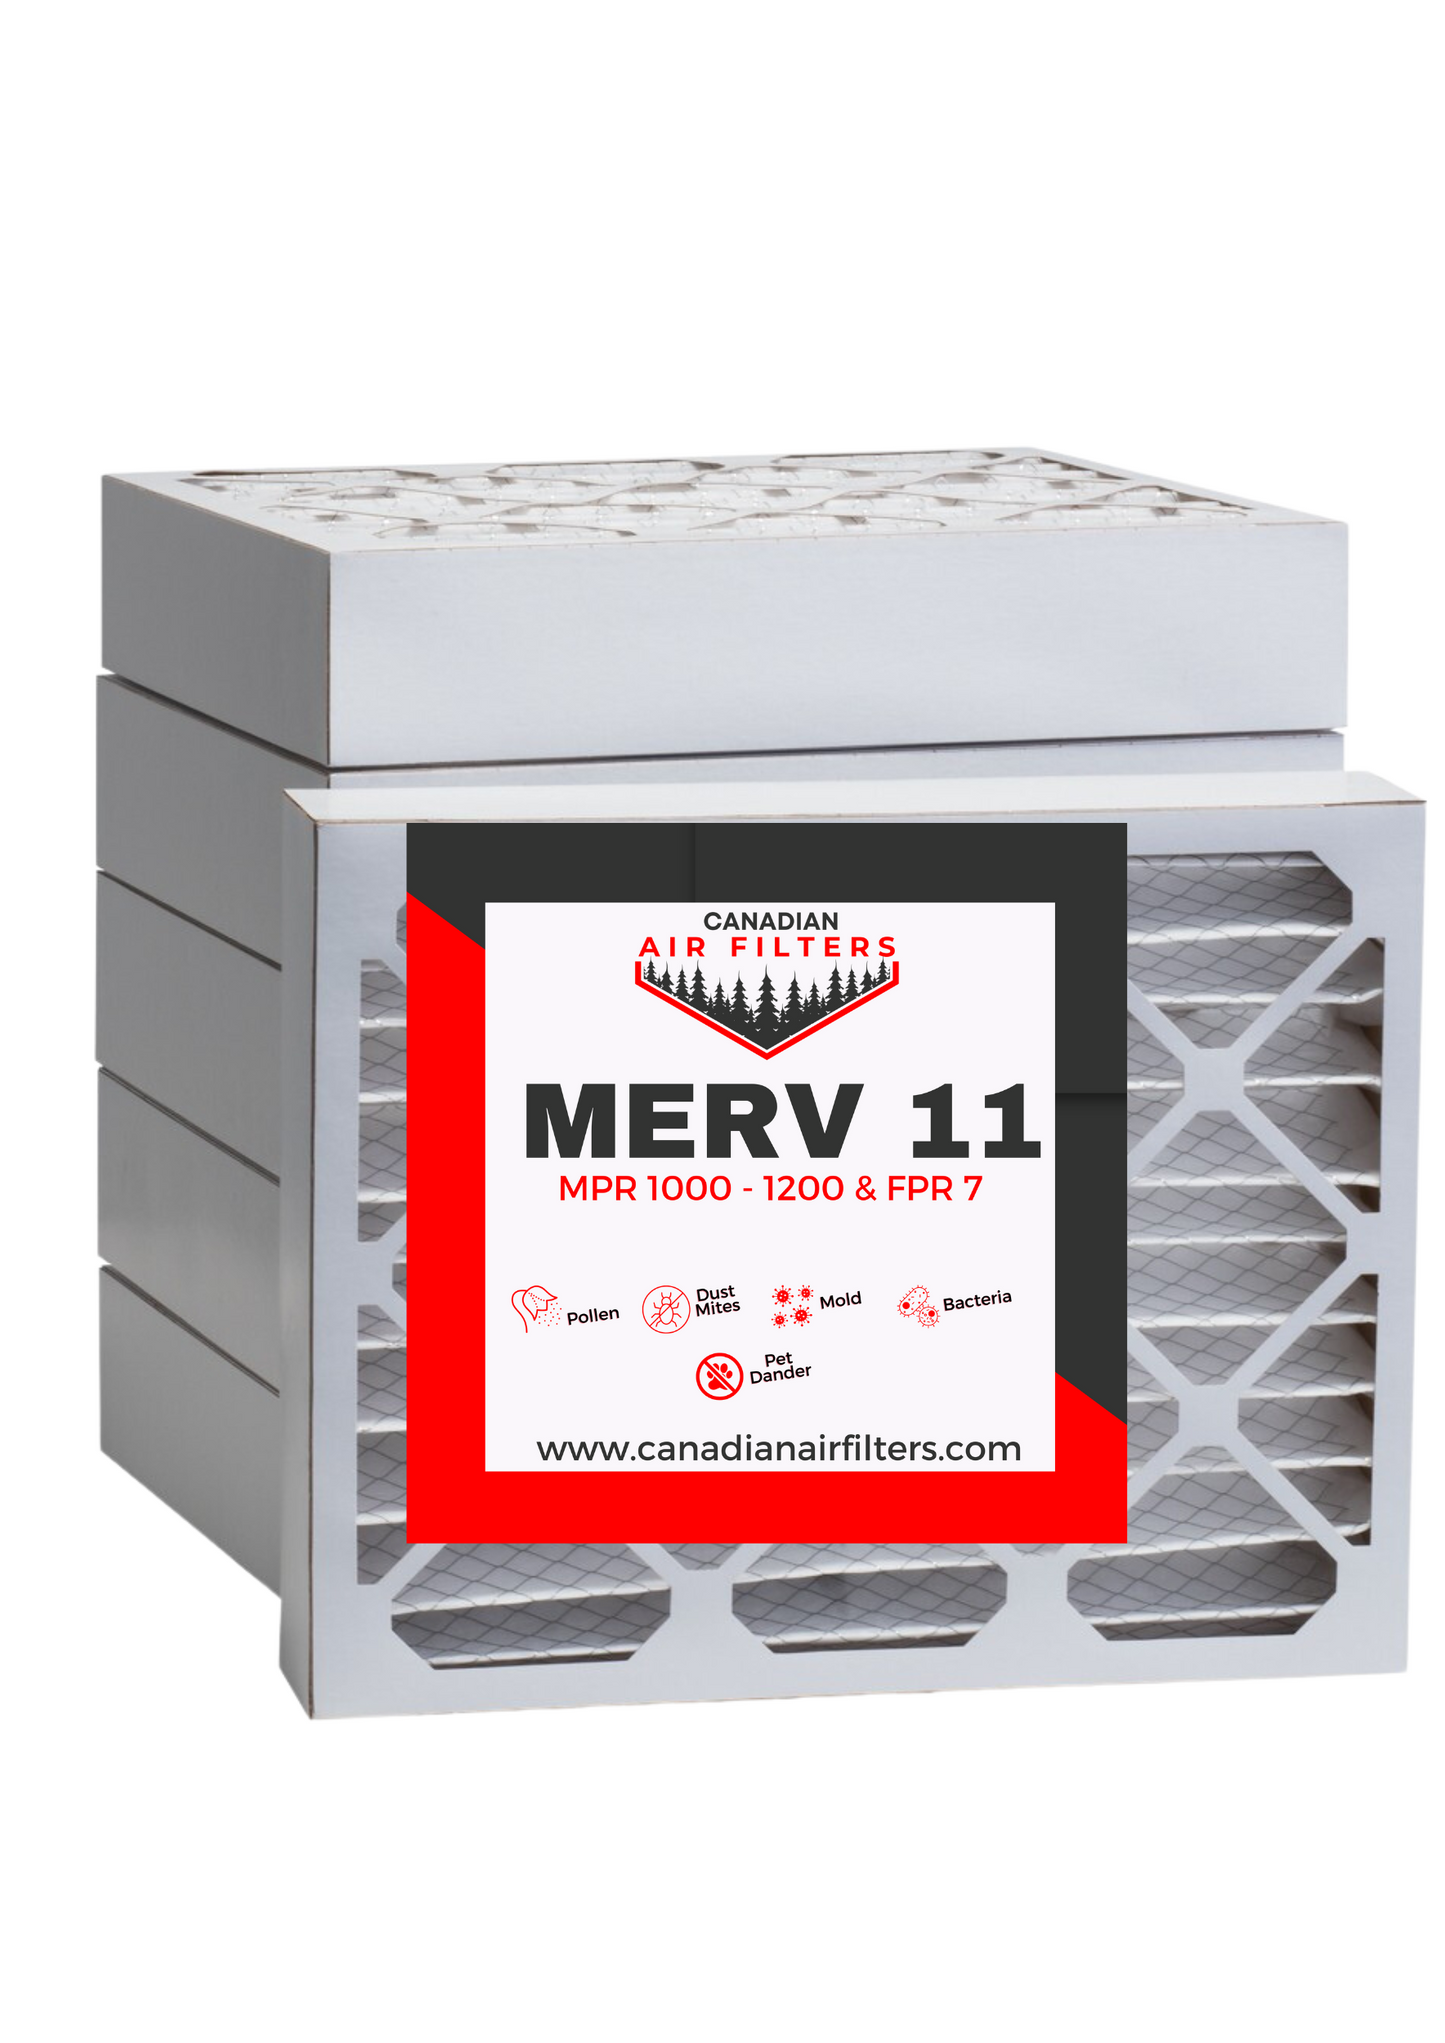 20 x 20 x 5 MERV 11 Aftermarket Replacement Filter AIRBEAR (04 pack)